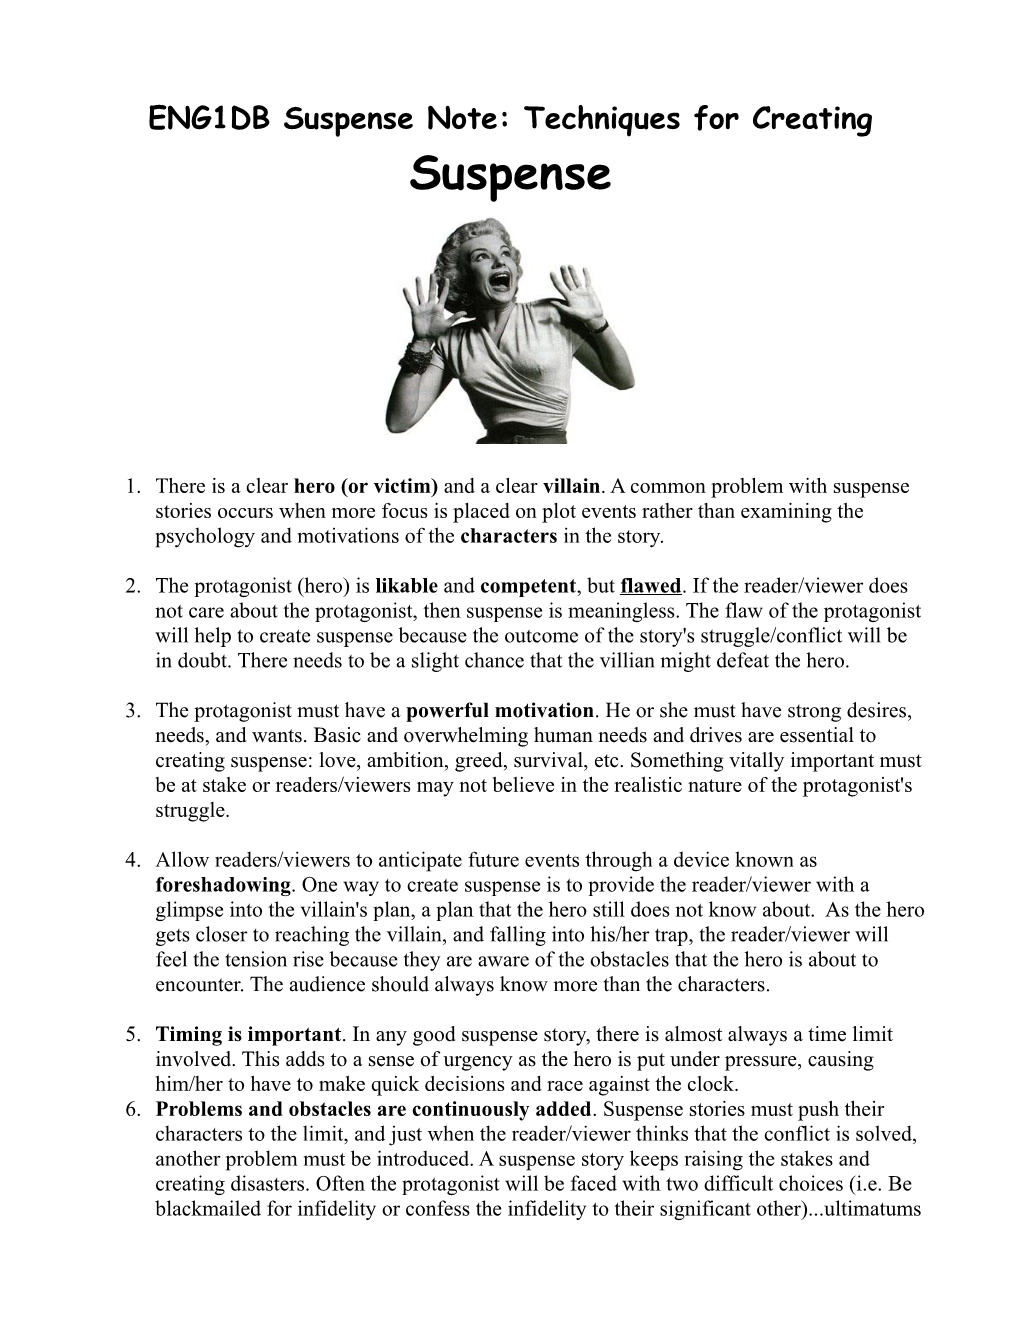 ENG1DB Suspense Note: Techniques for Creating Suspense